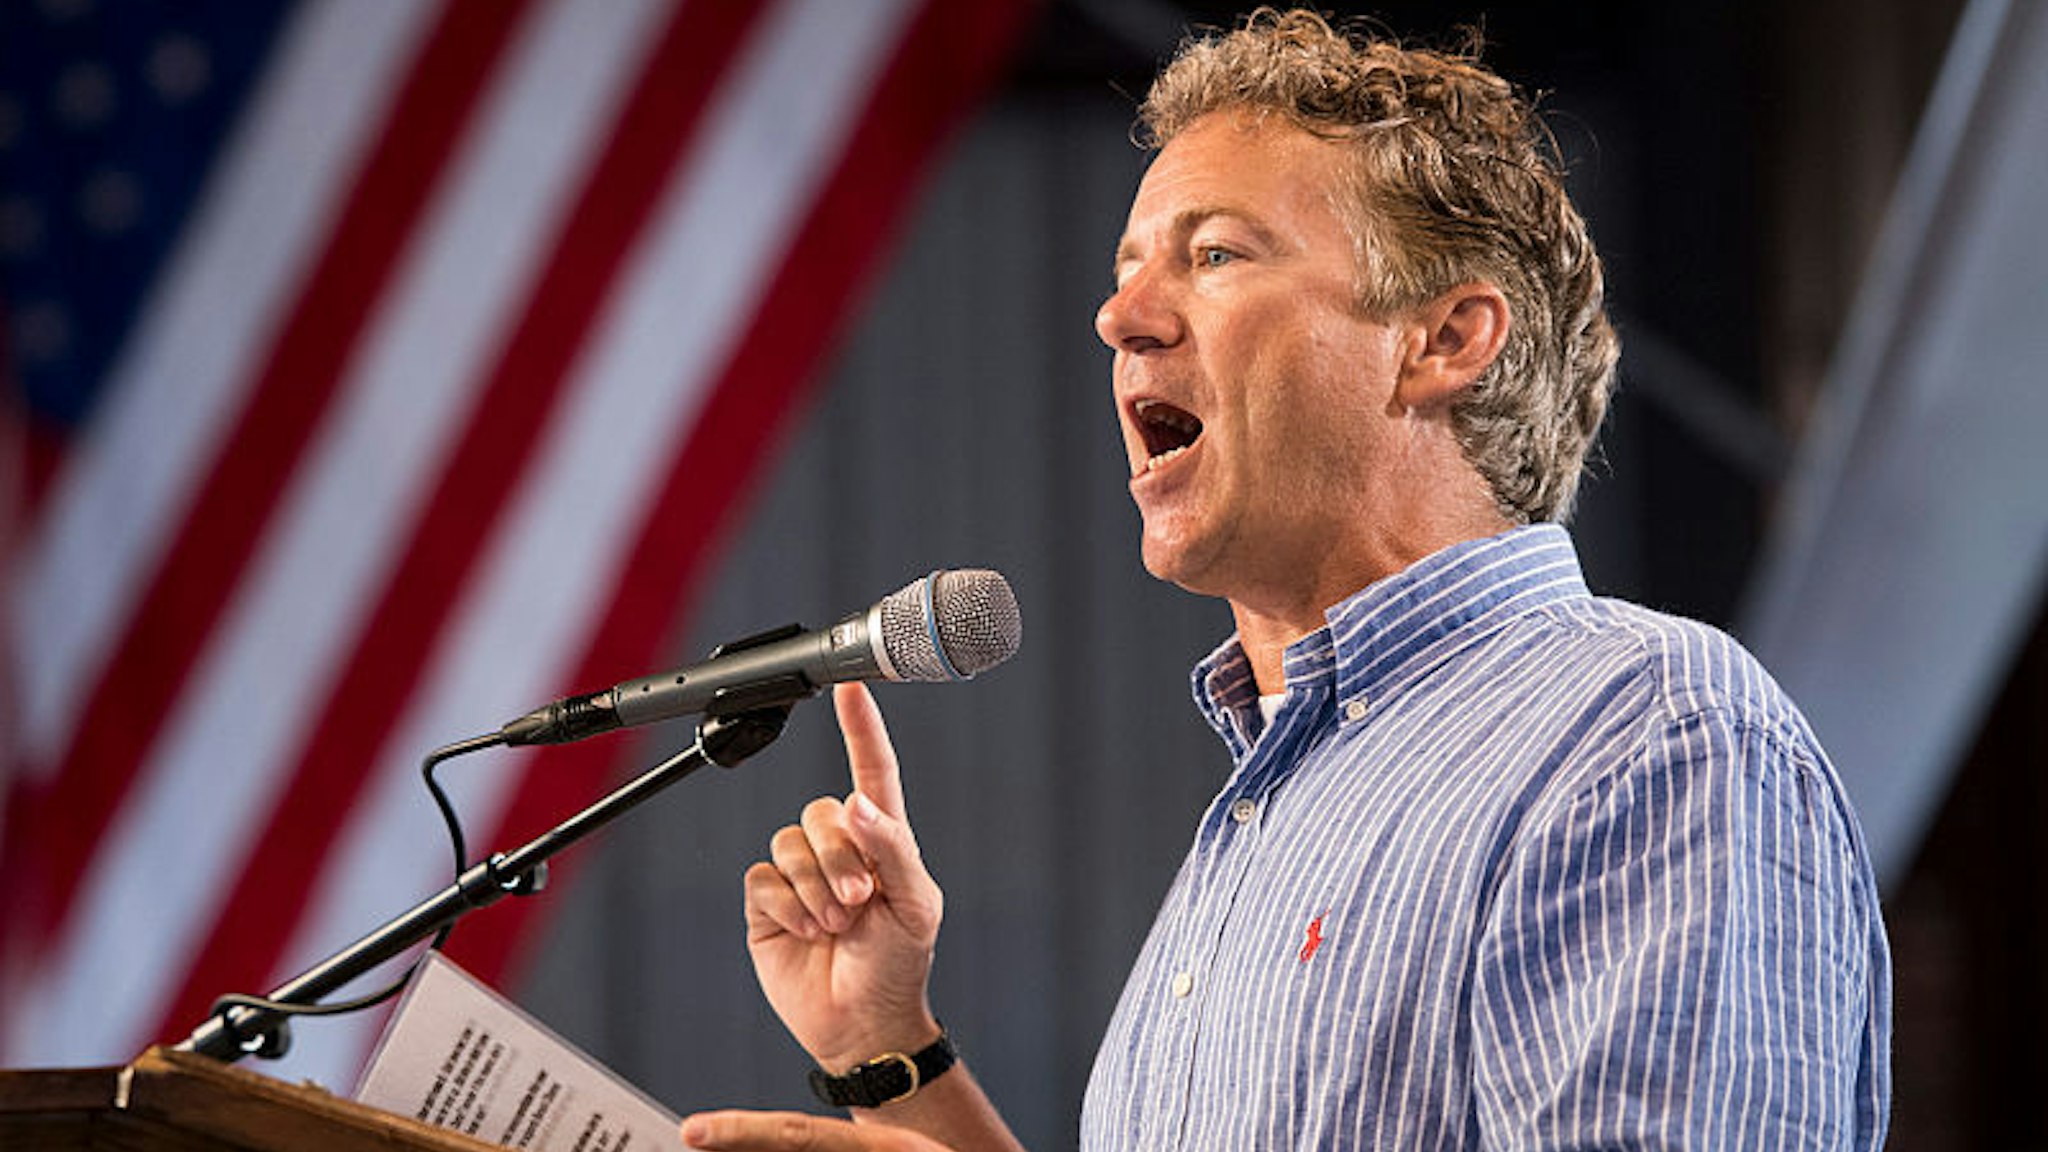 UNITED STATES - AUGUST 6: Sen. Rand Paul (R-KY) speaks at the annual Fancy Farm Picnic in Fancy Farm, Ky., on Saturday, Aug. 6, 2016.